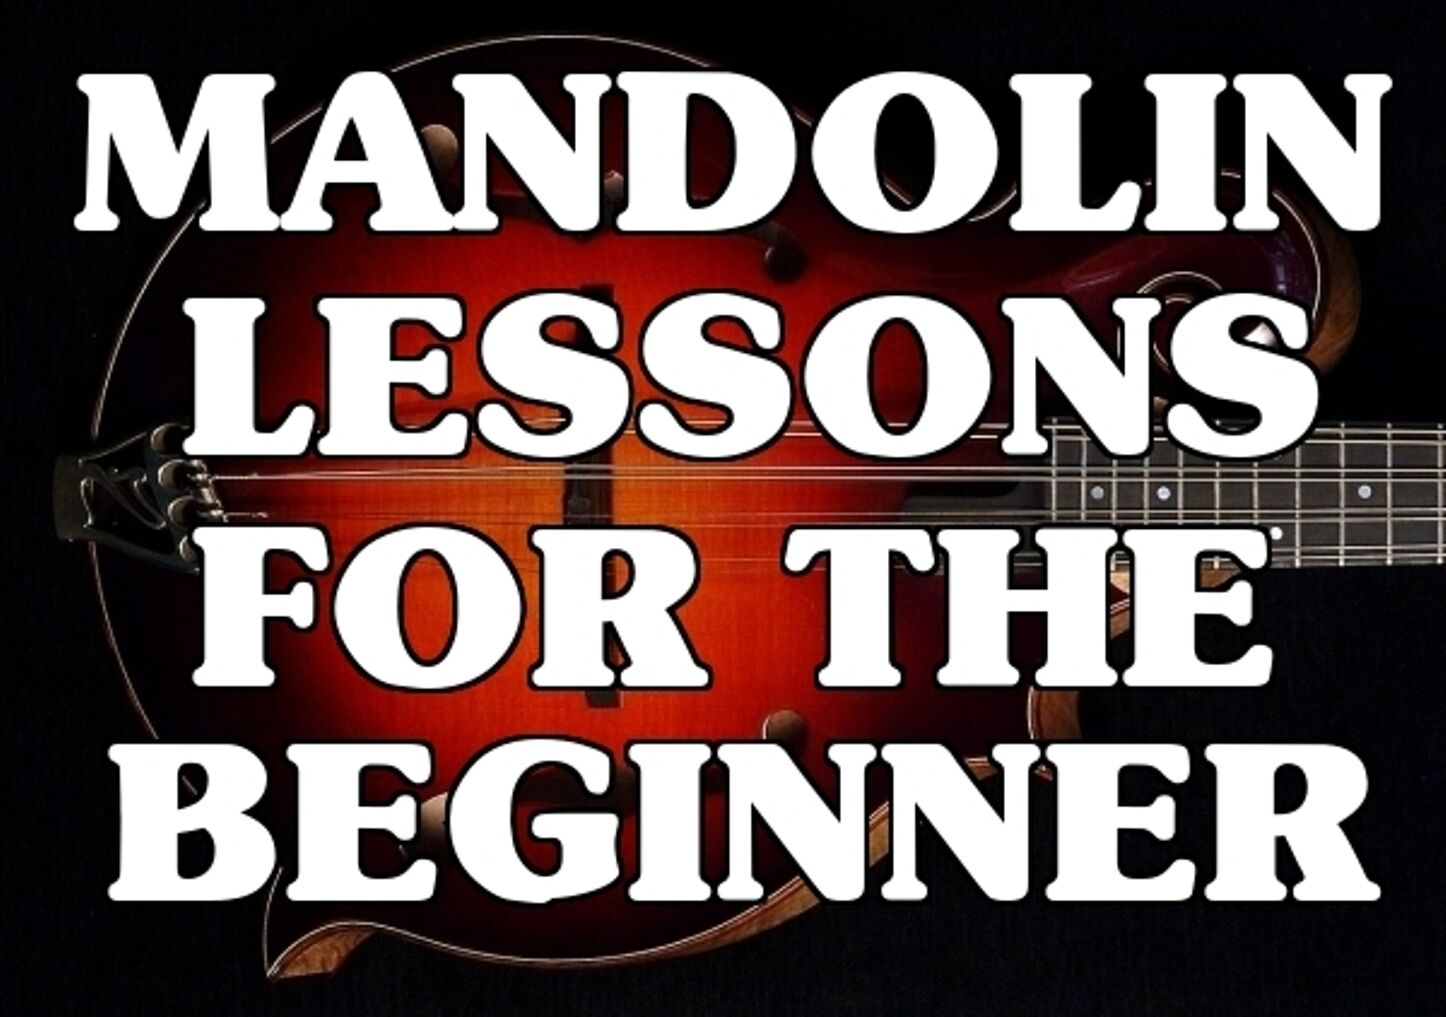 Mandolin Lessons For The Beginner DVD Learn Country And Bluegrass Amazing Course